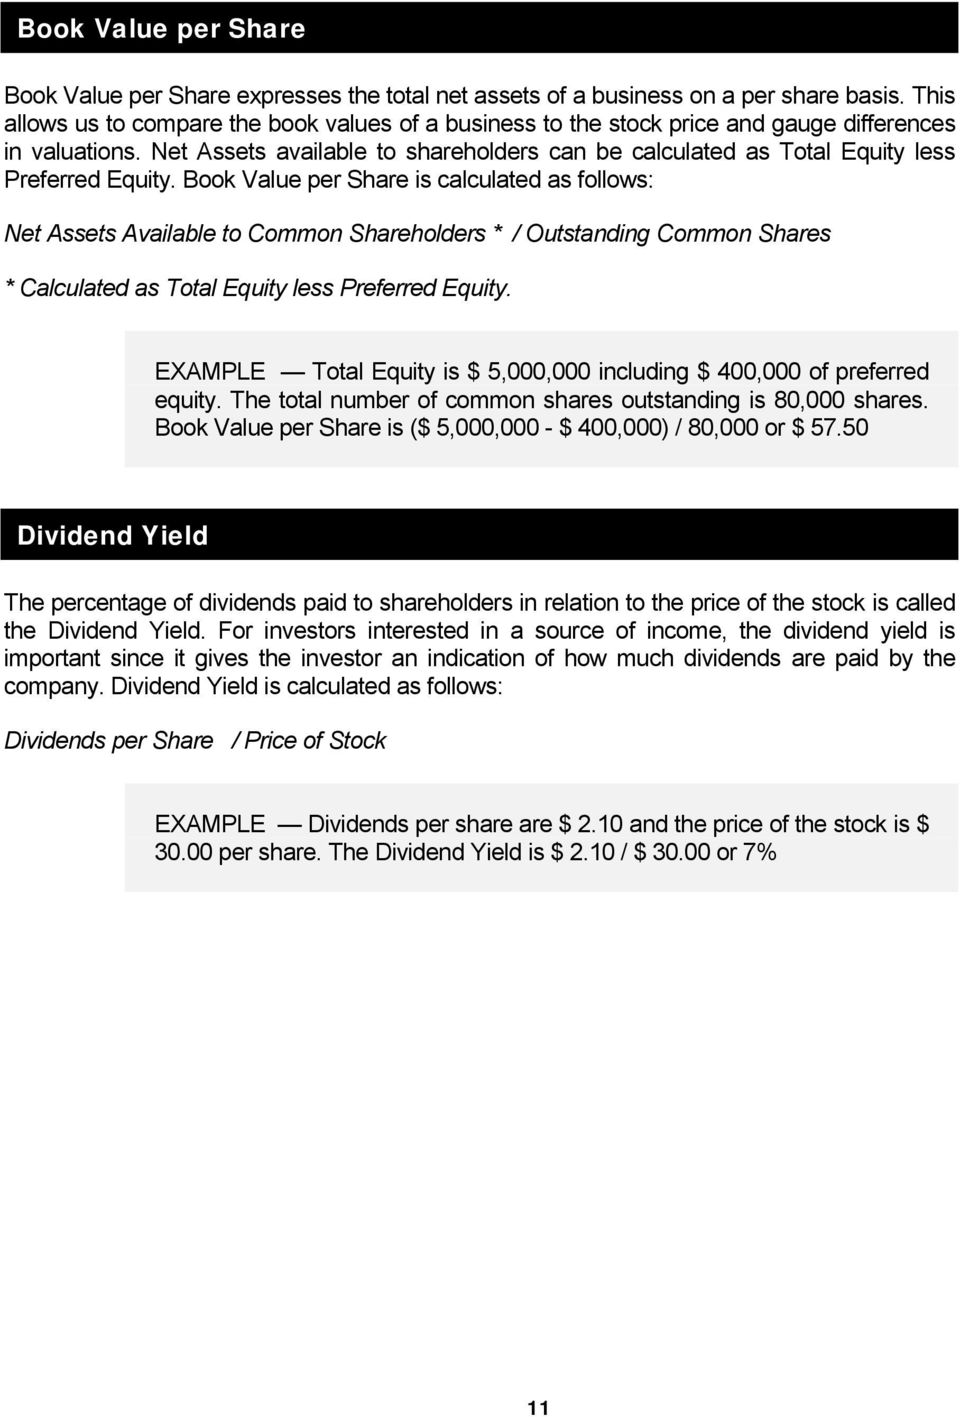 Net Assets available to shareholders can be calculated as Total Equity less Preferred Equity.